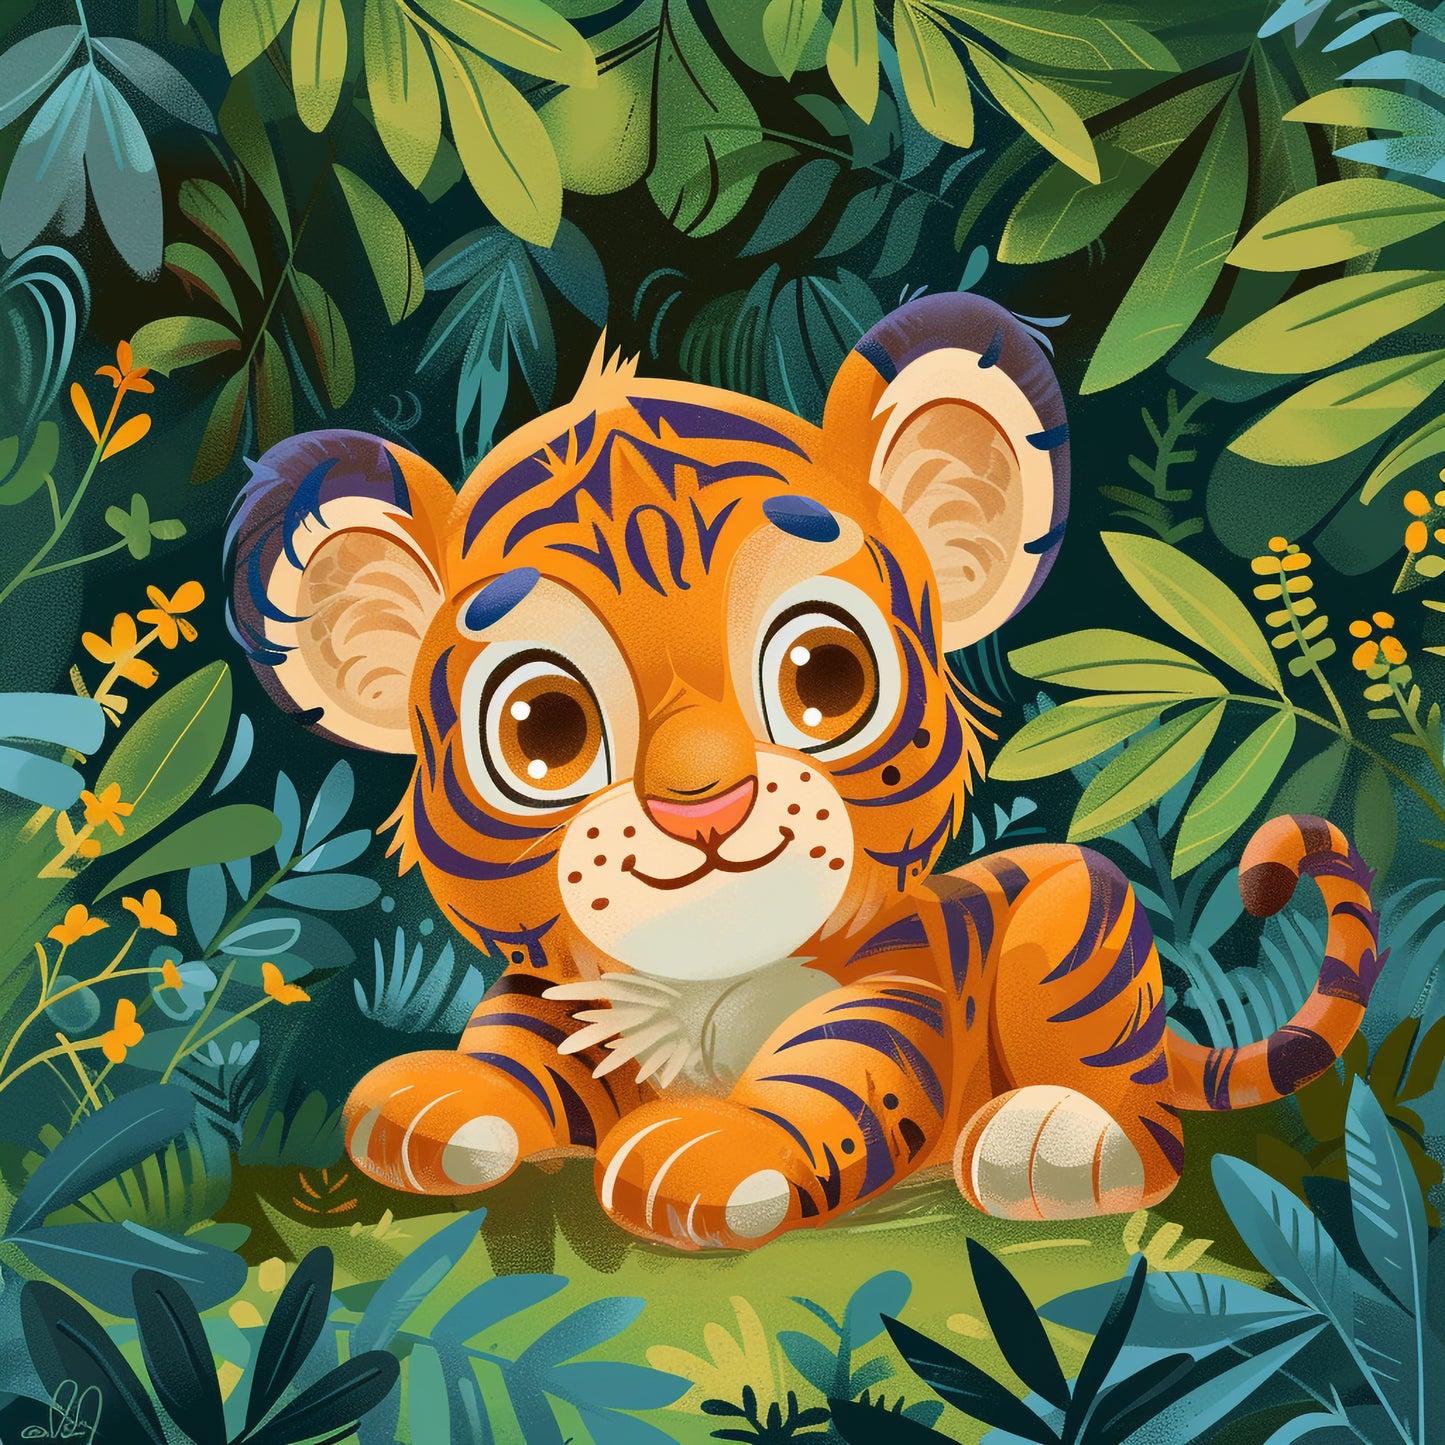 Adorable Baby Tiger Lying in Lush Green Foliage